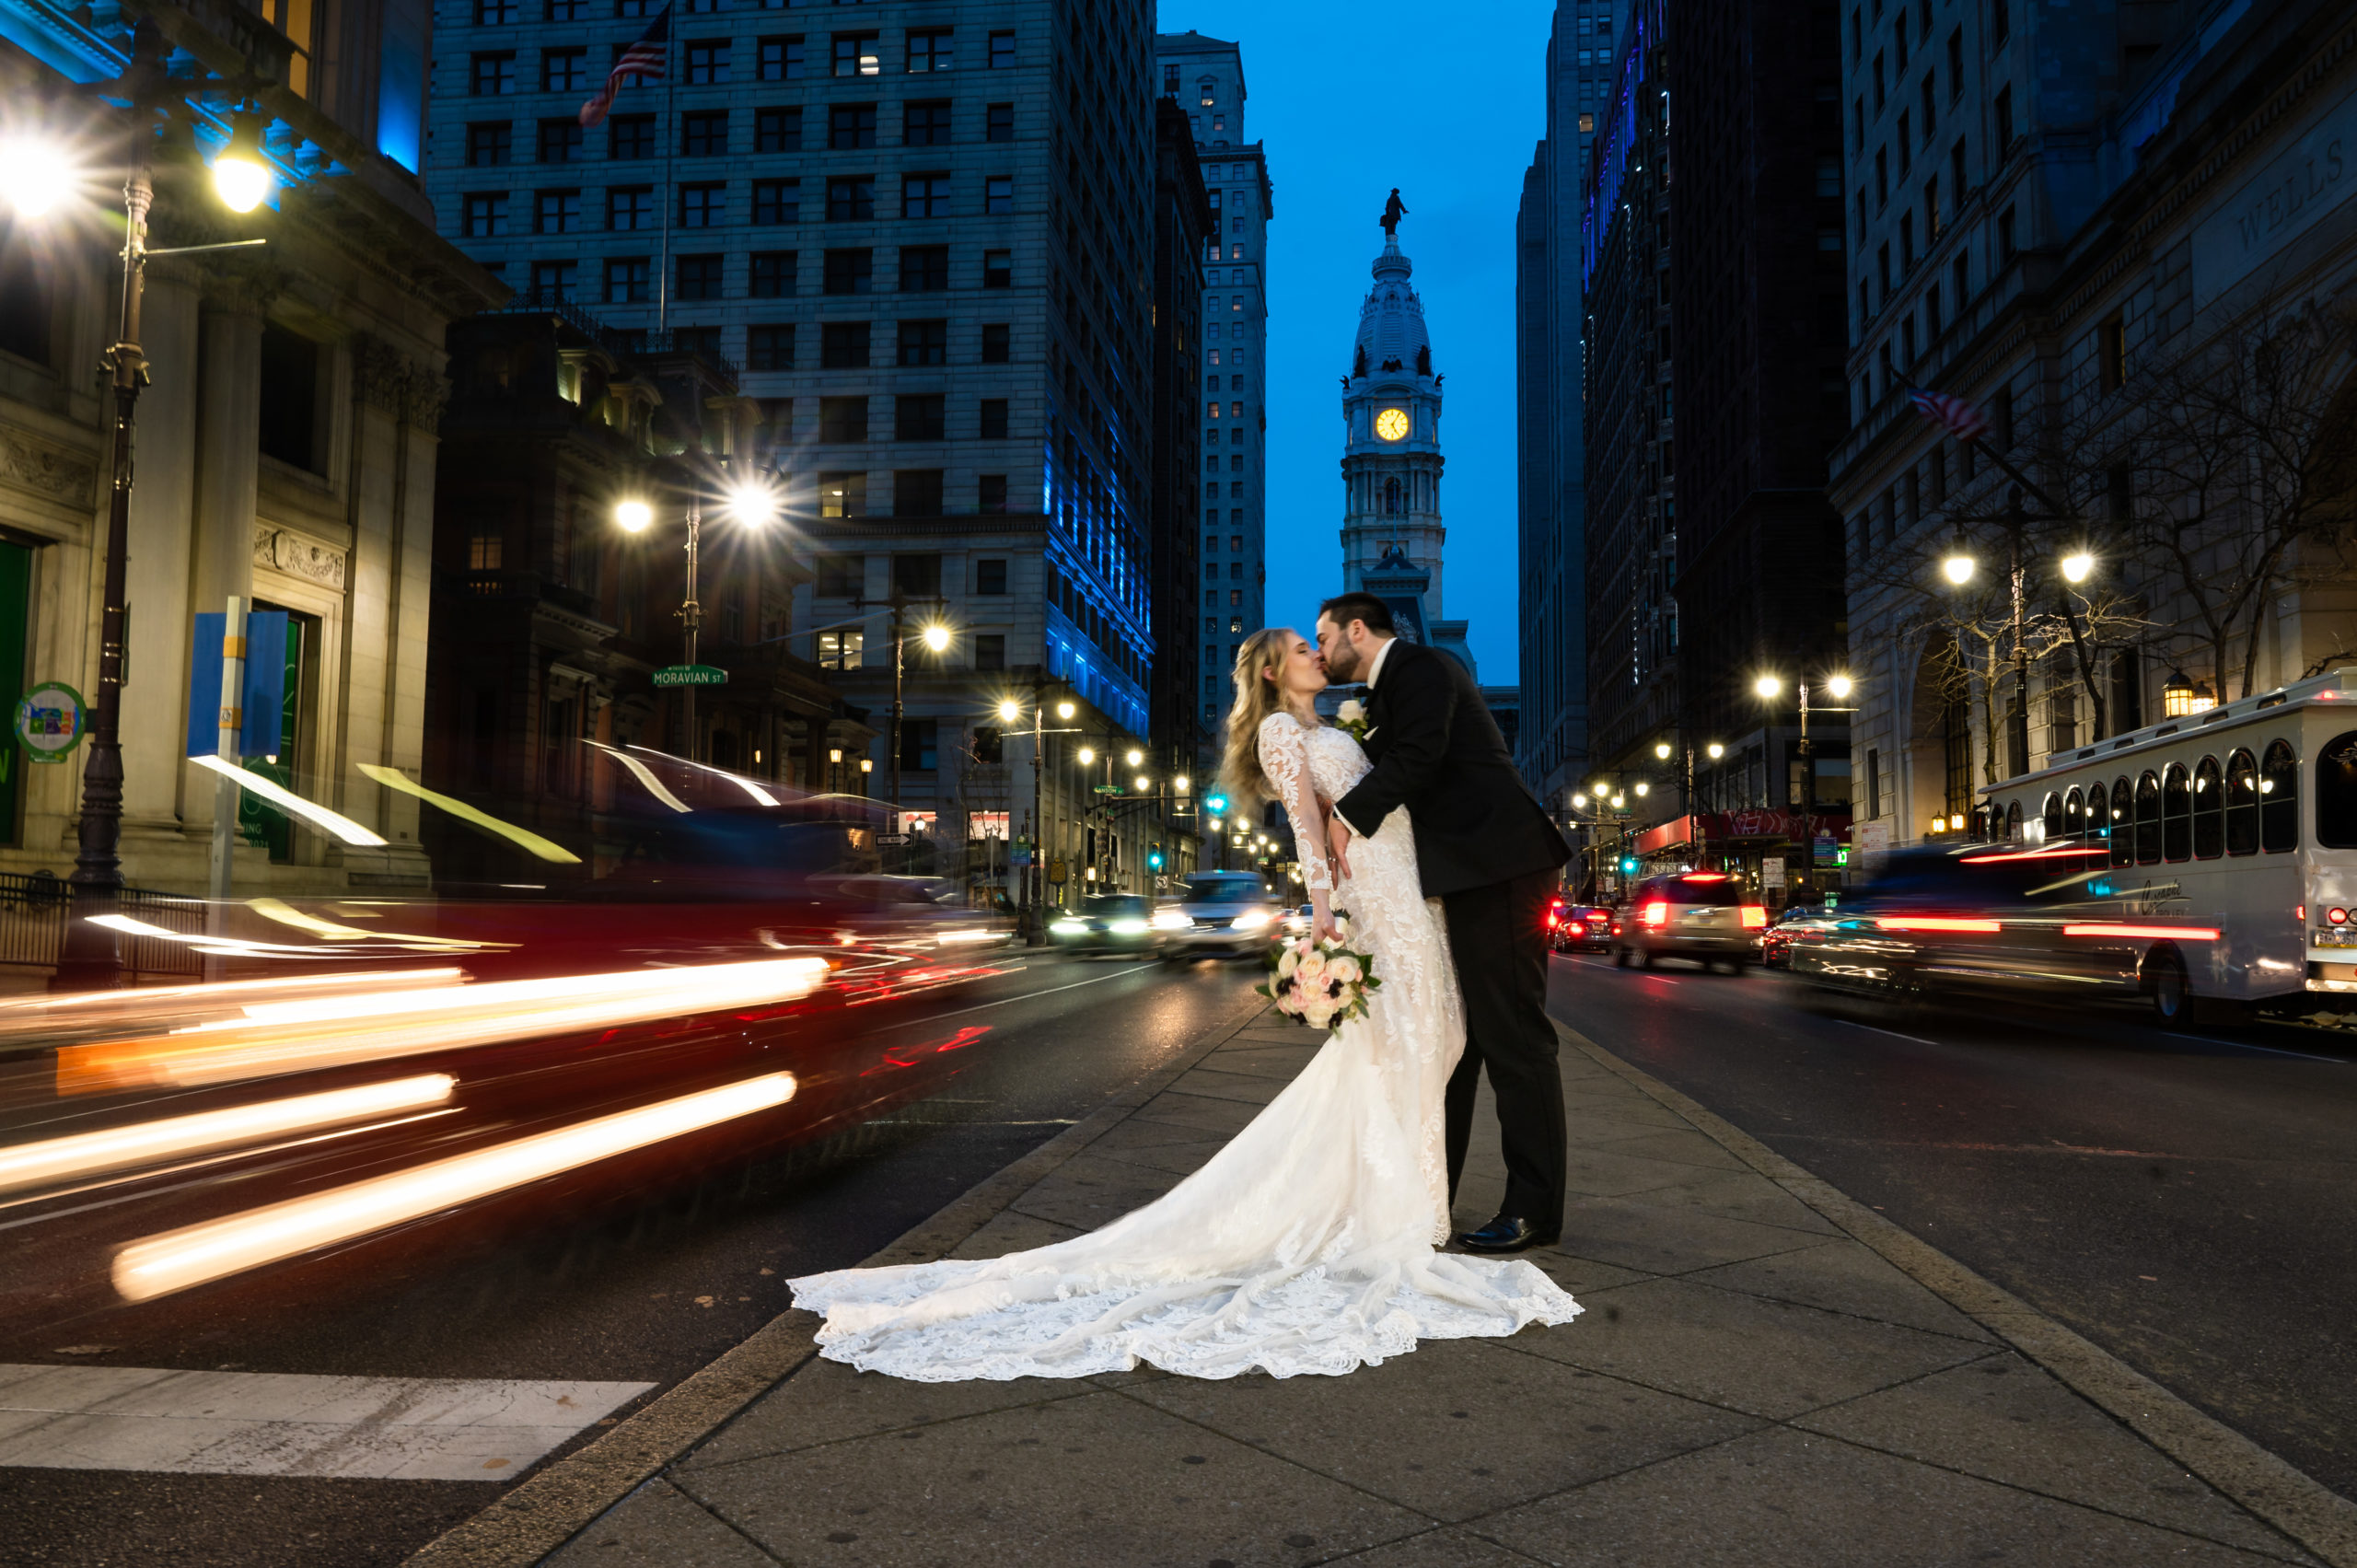 Wedding photo on broad street in Philadelphia at night with shutter drag